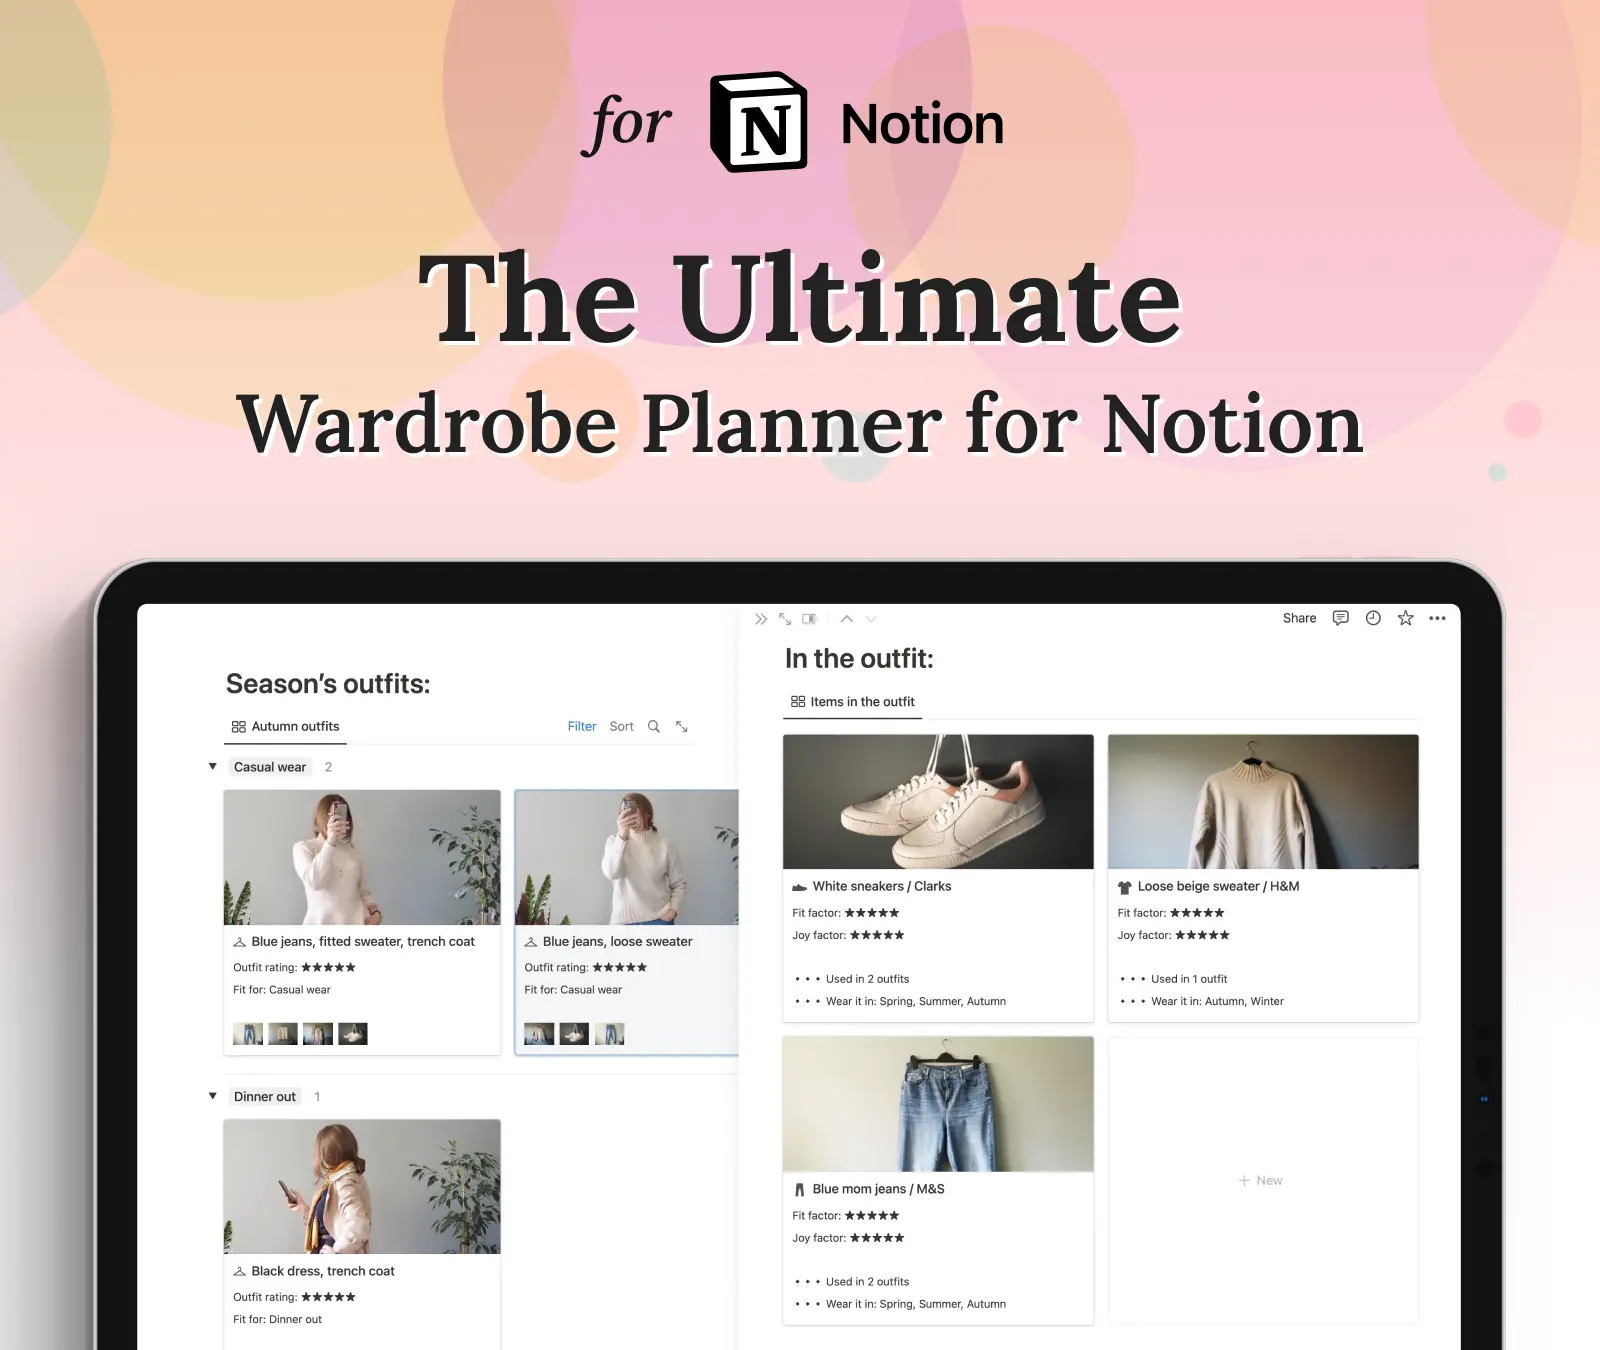 The ultimate wardrobe planner for Notion